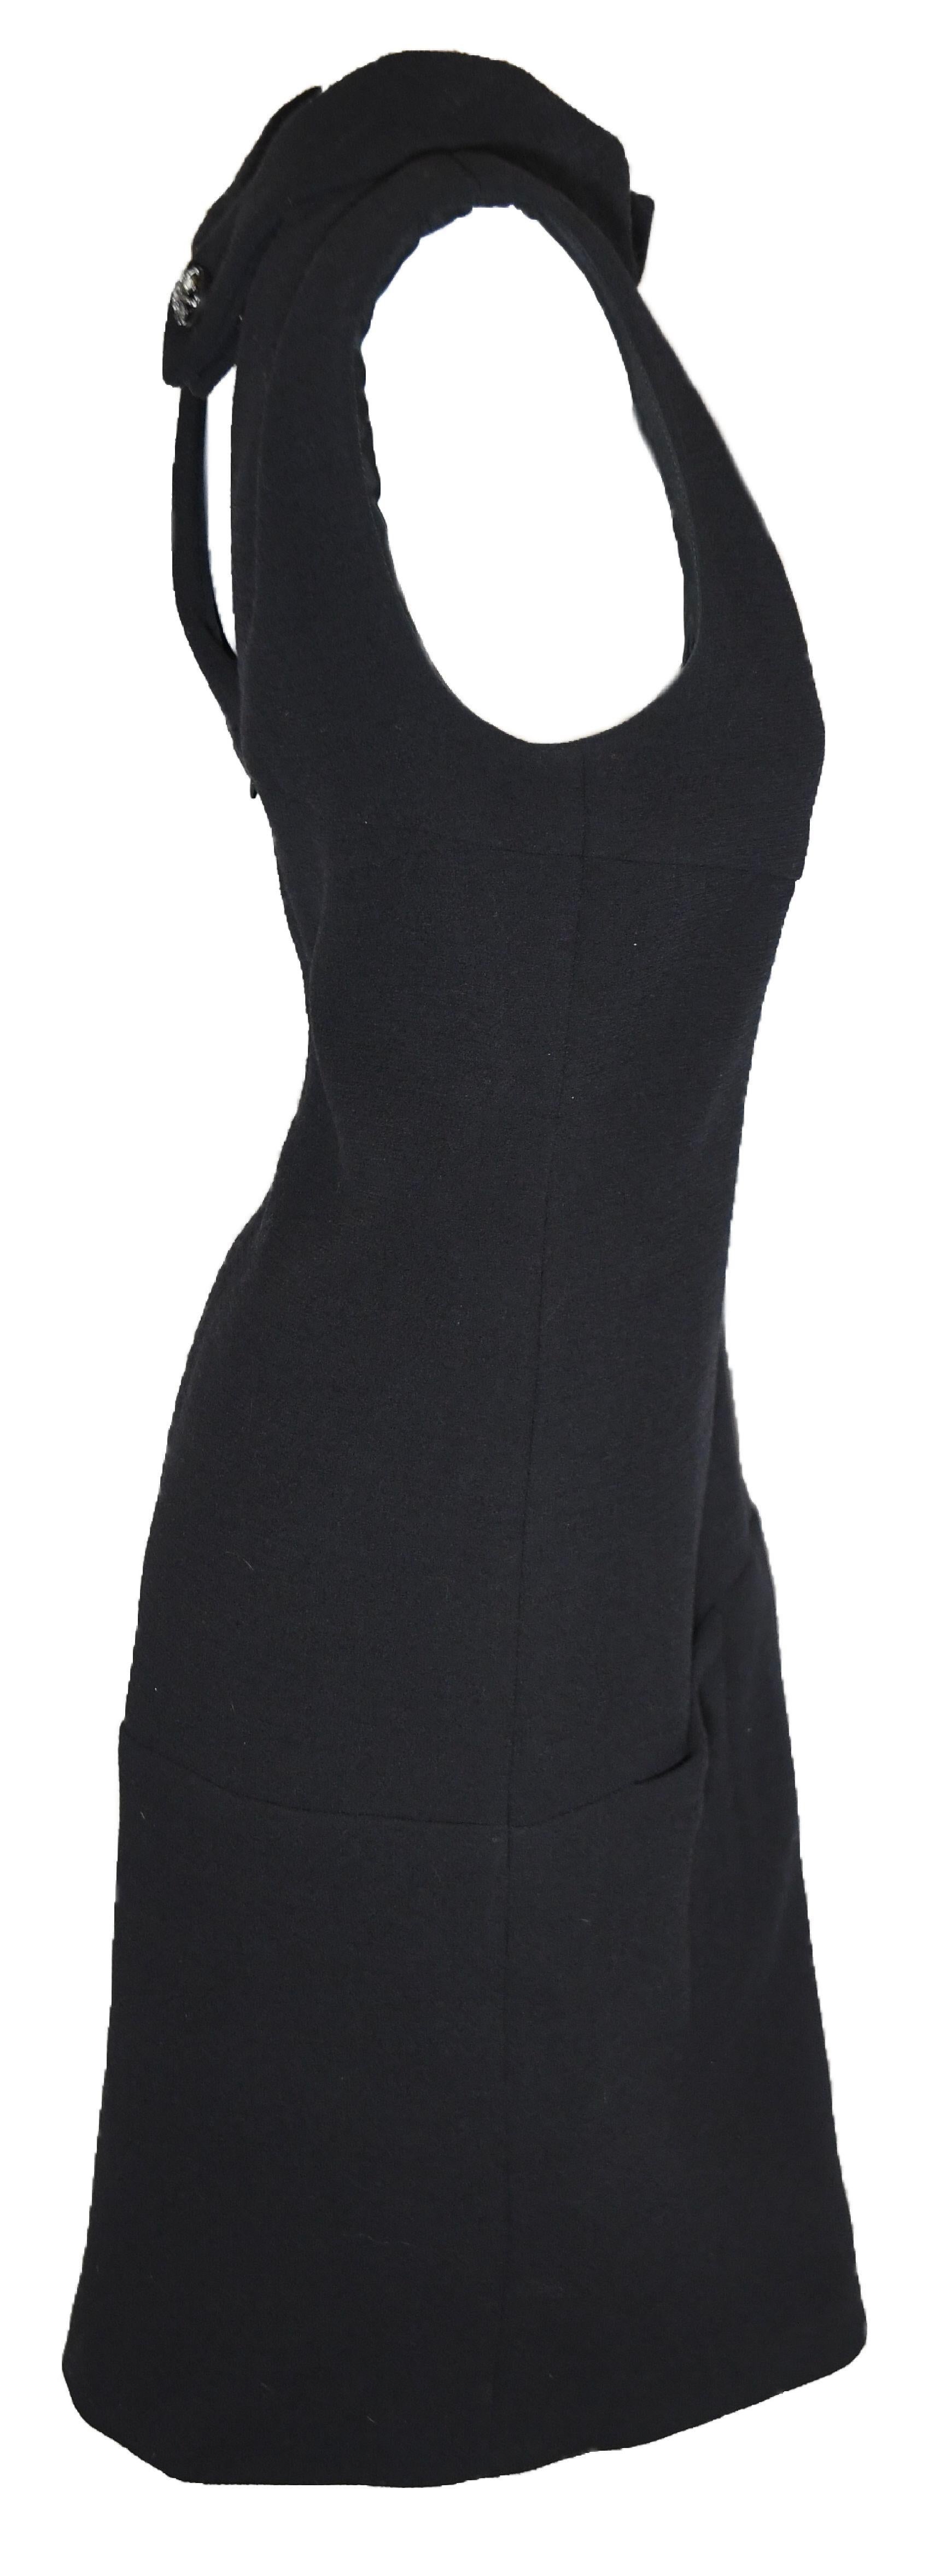 Chanel Black Knit Sleeveless Little Black Dress  In Excellent Condition For Sale In Palm Beach, FL